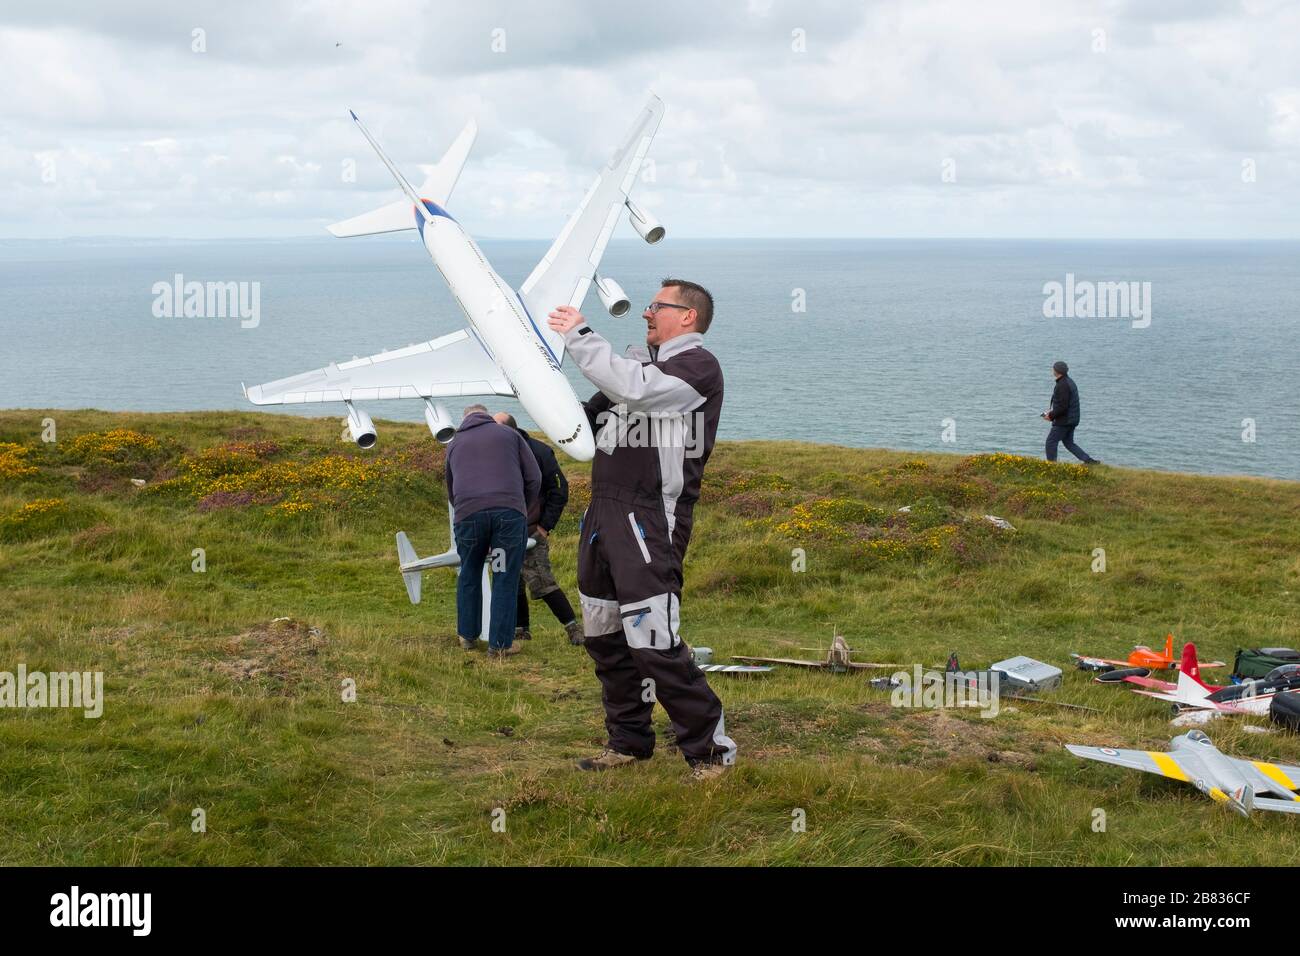 Model aircraft enthusiasts with gliders on the Great Orme at Llandudno, Wales, UK Stock Photo